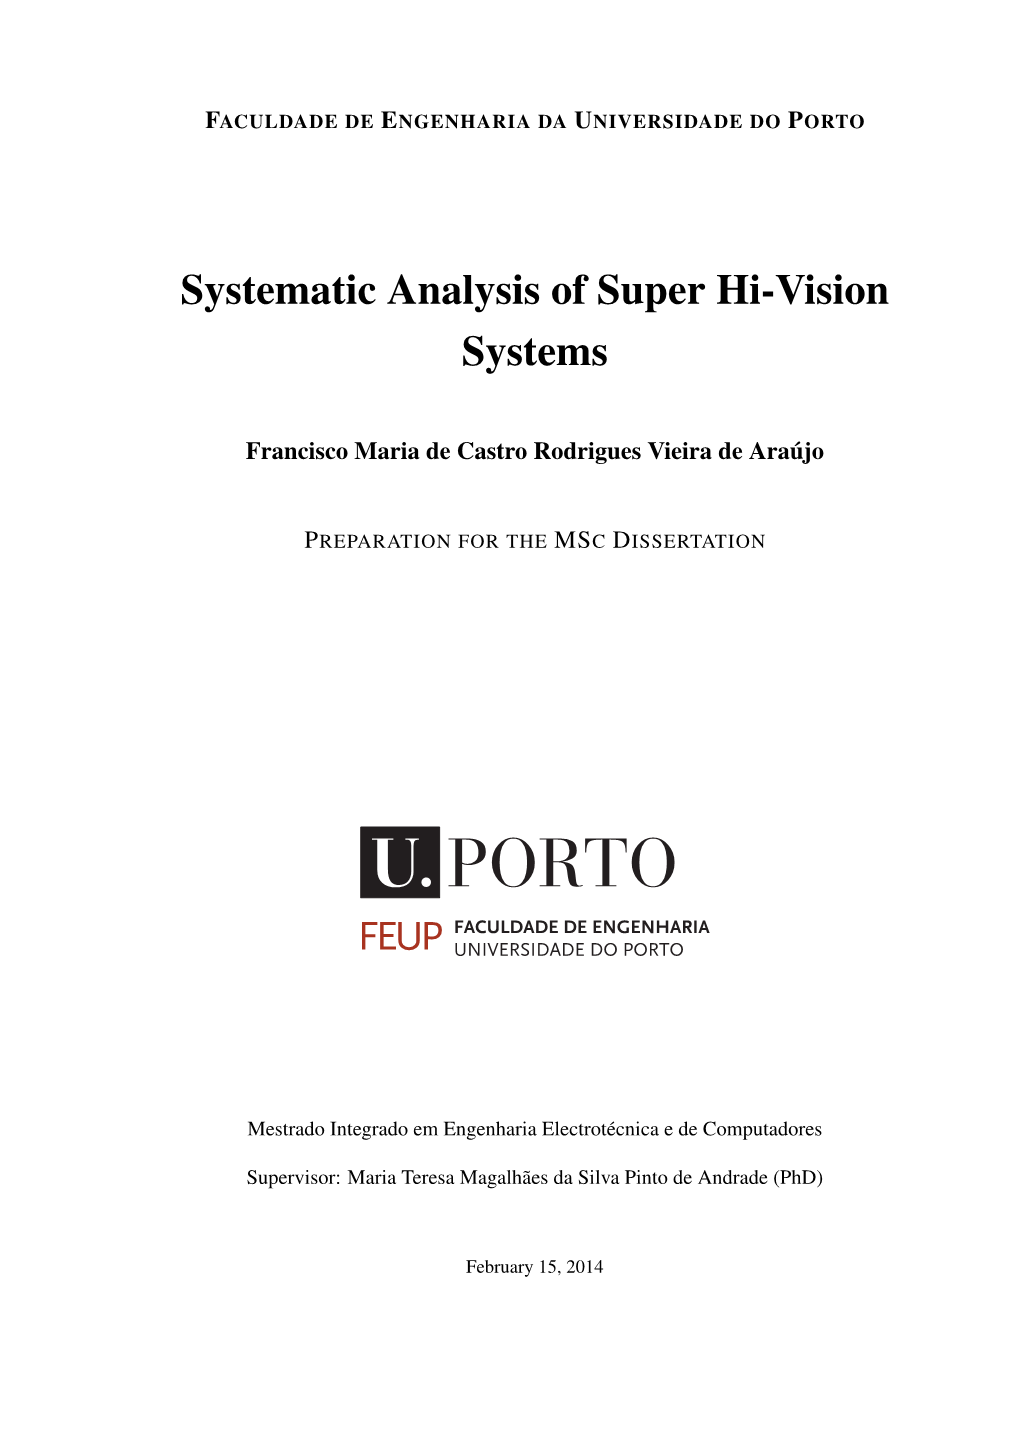 Systematic Analysis of Super Hi-Vision Systems